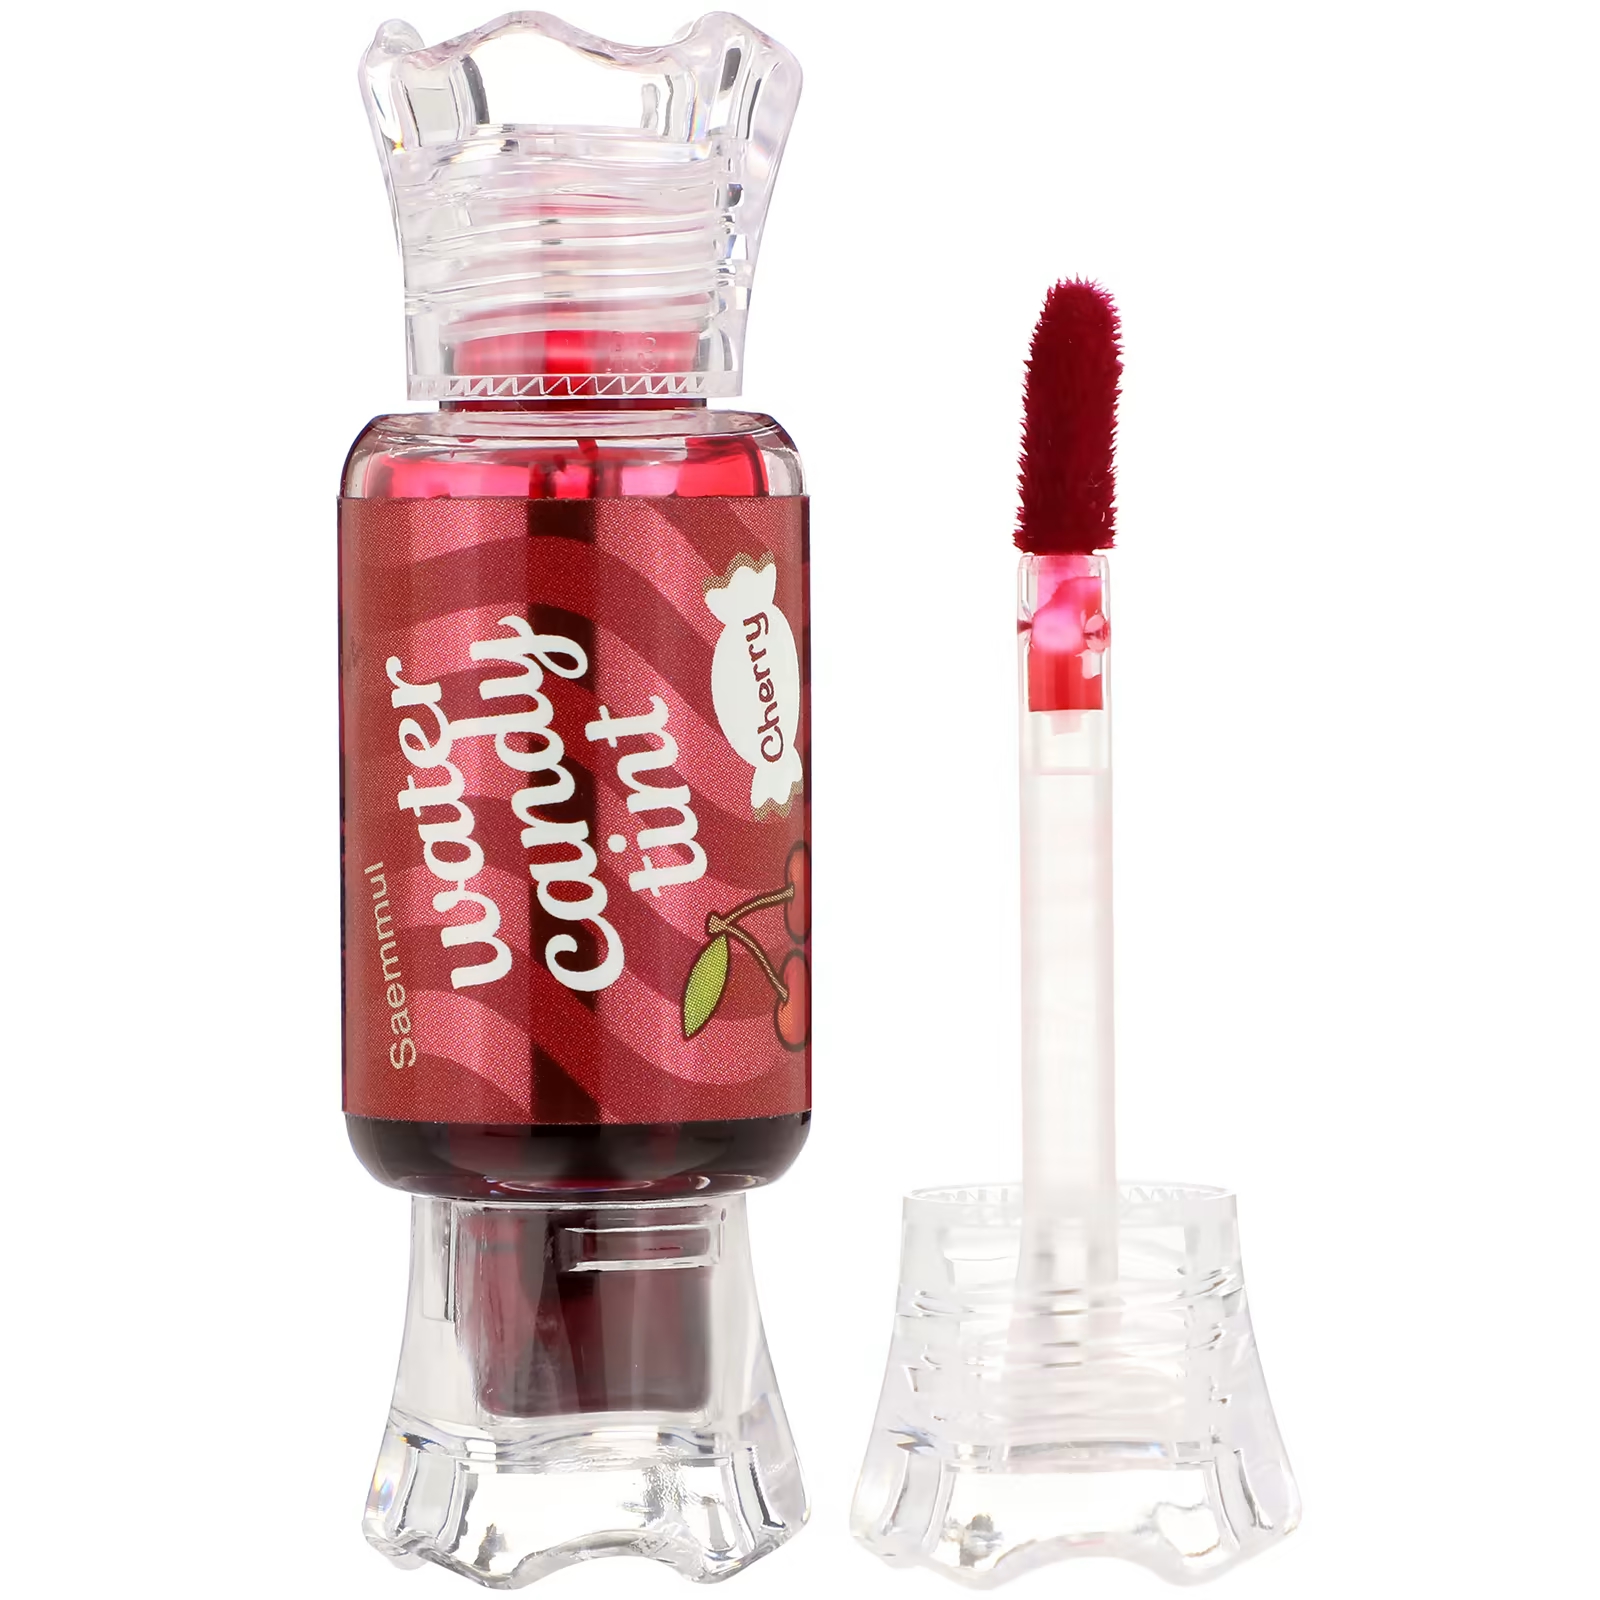 The Saem Water Candy Тинт 01 Вишневый, 0,08 унции the saem water candy тинт 01 вишневый 0 08 унции